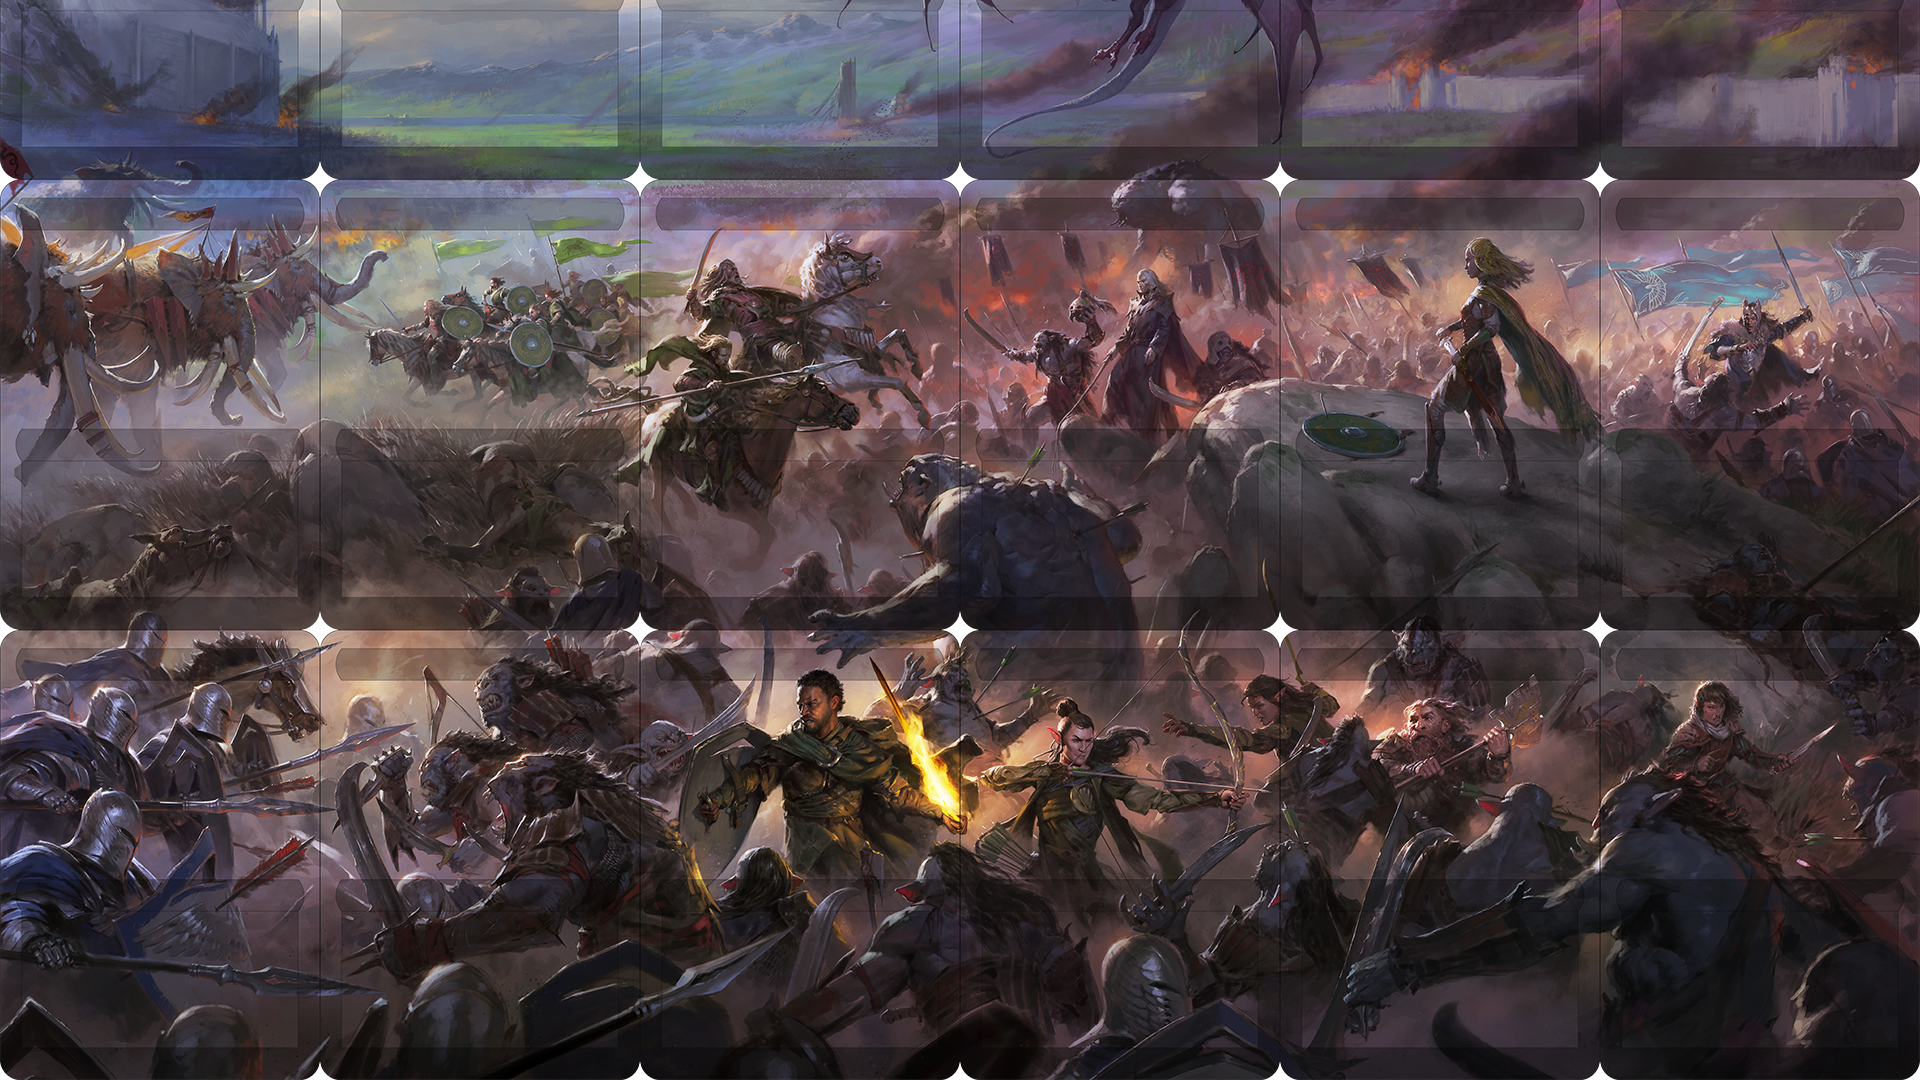 Panoramic card shot from Magic: The Gathering's Tales of Middle-earth set